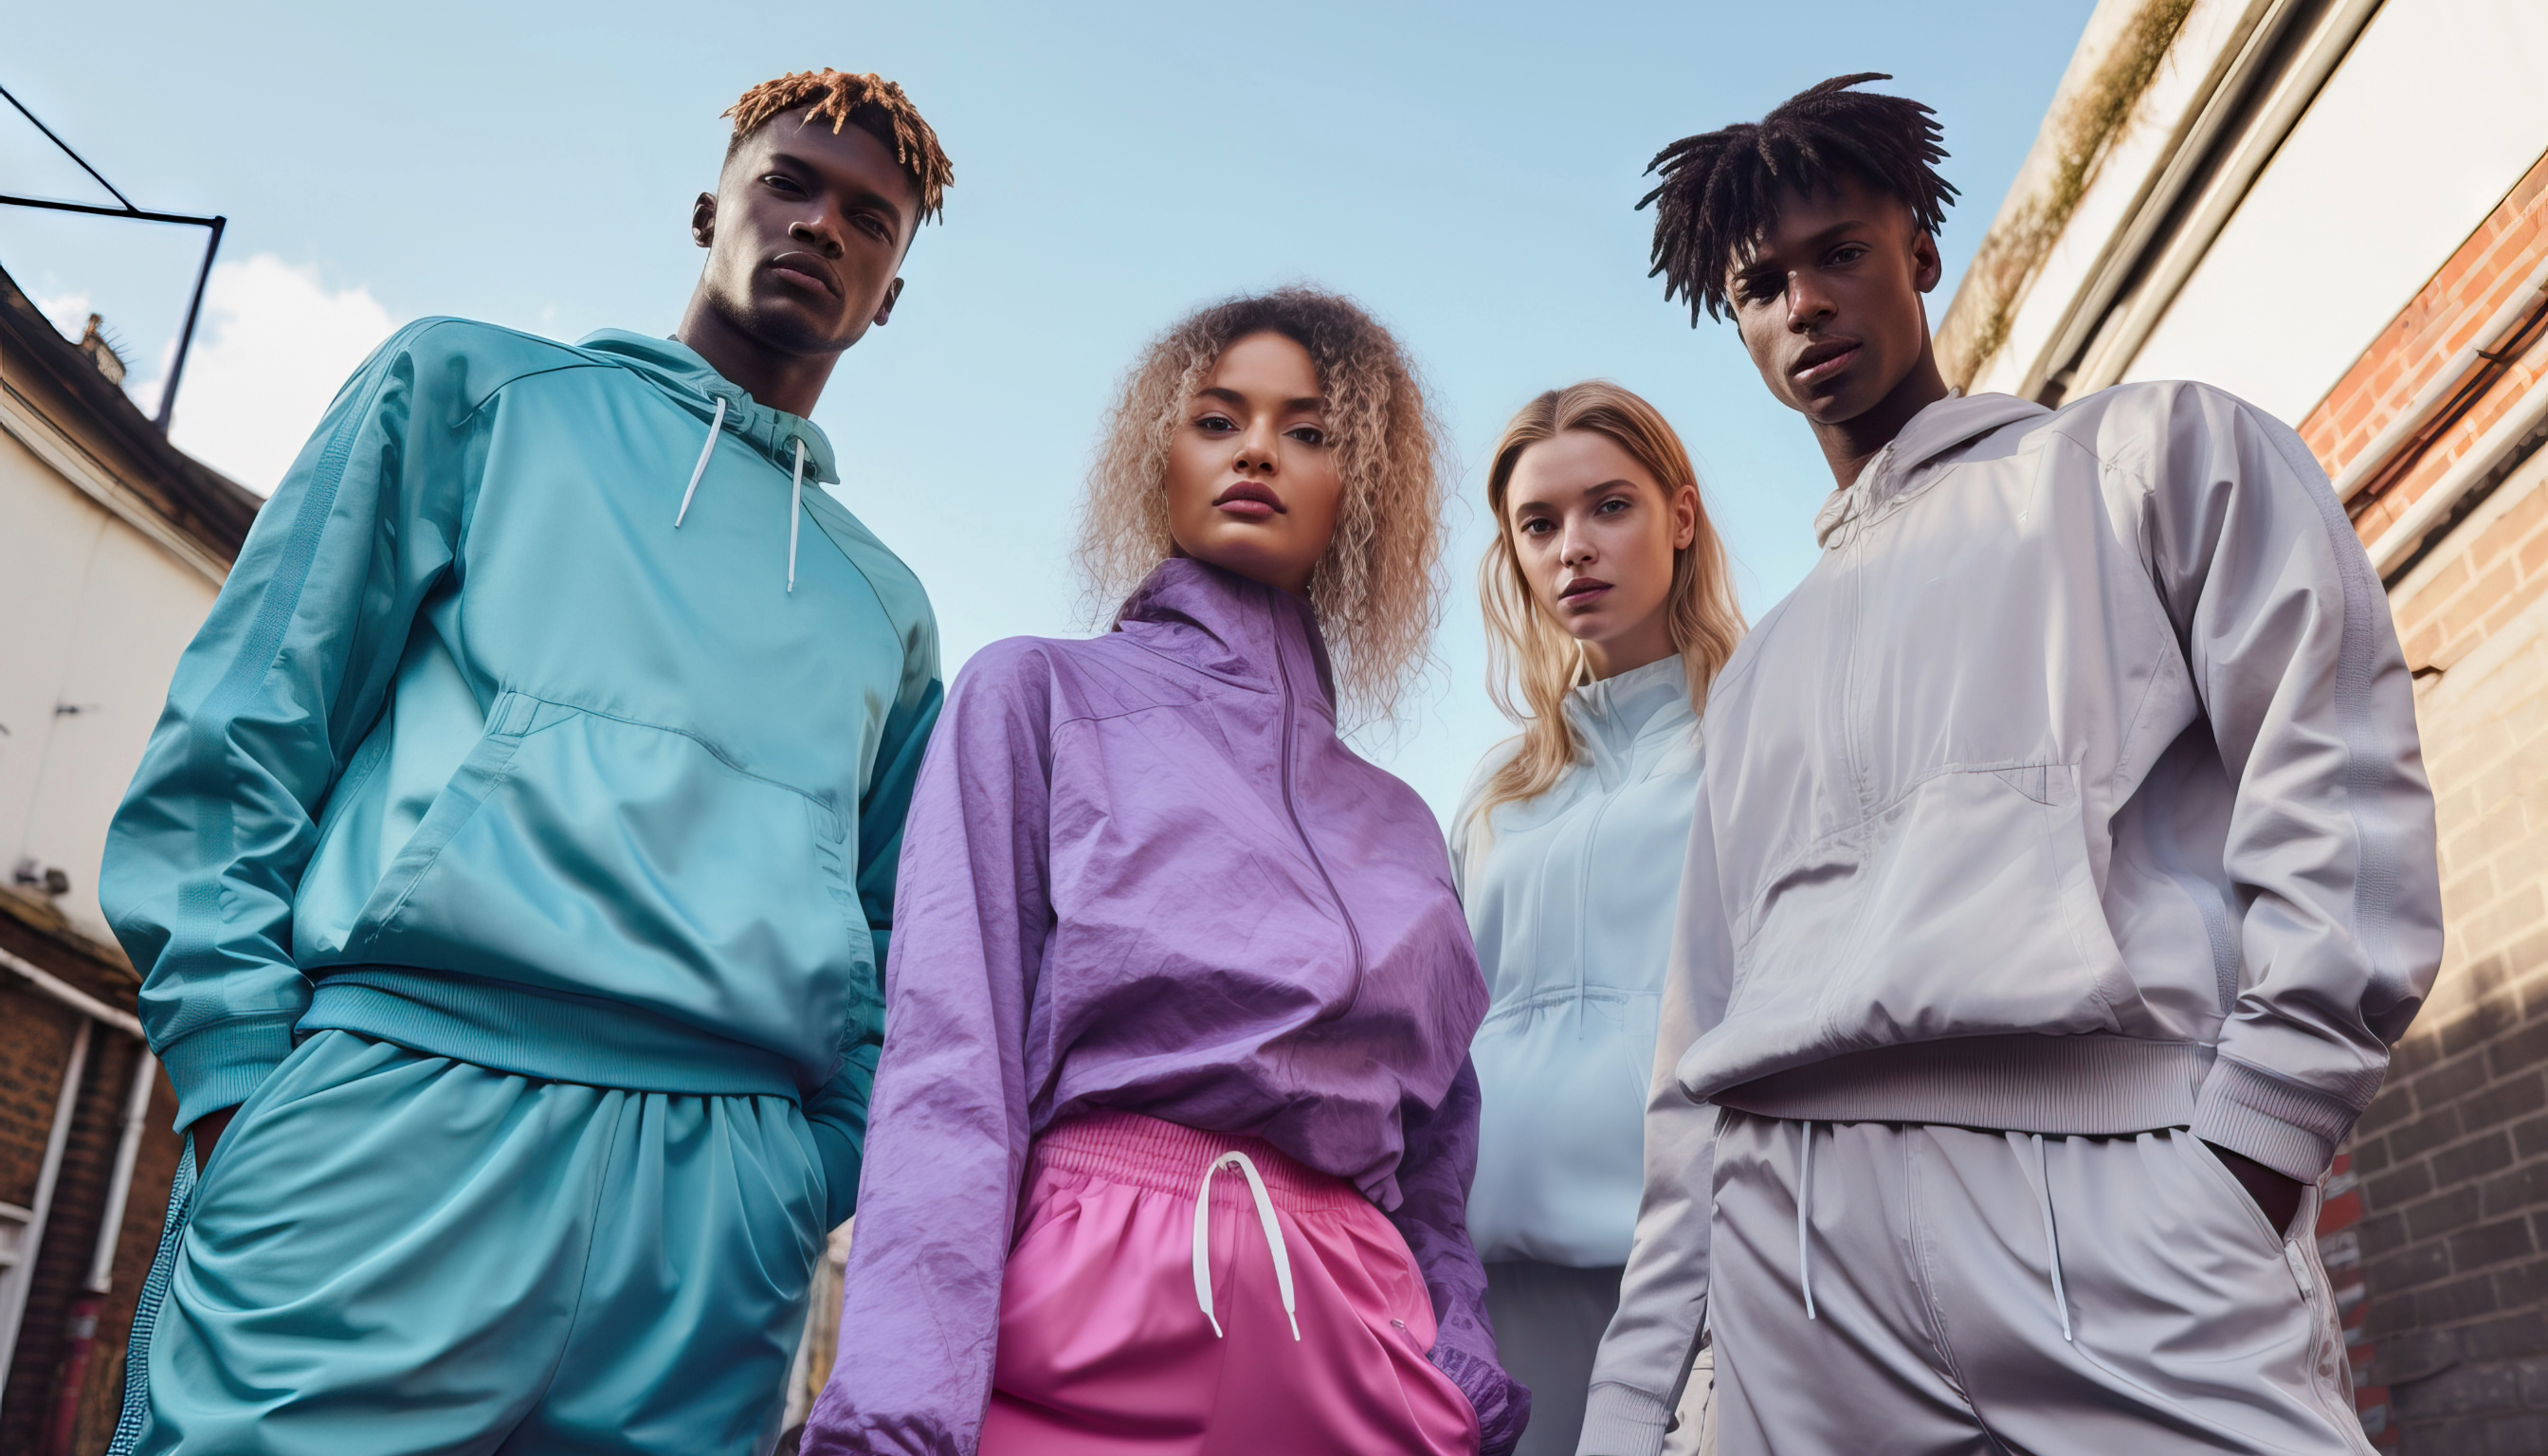 Why Athleisure Has Resonated with Modern Audiences